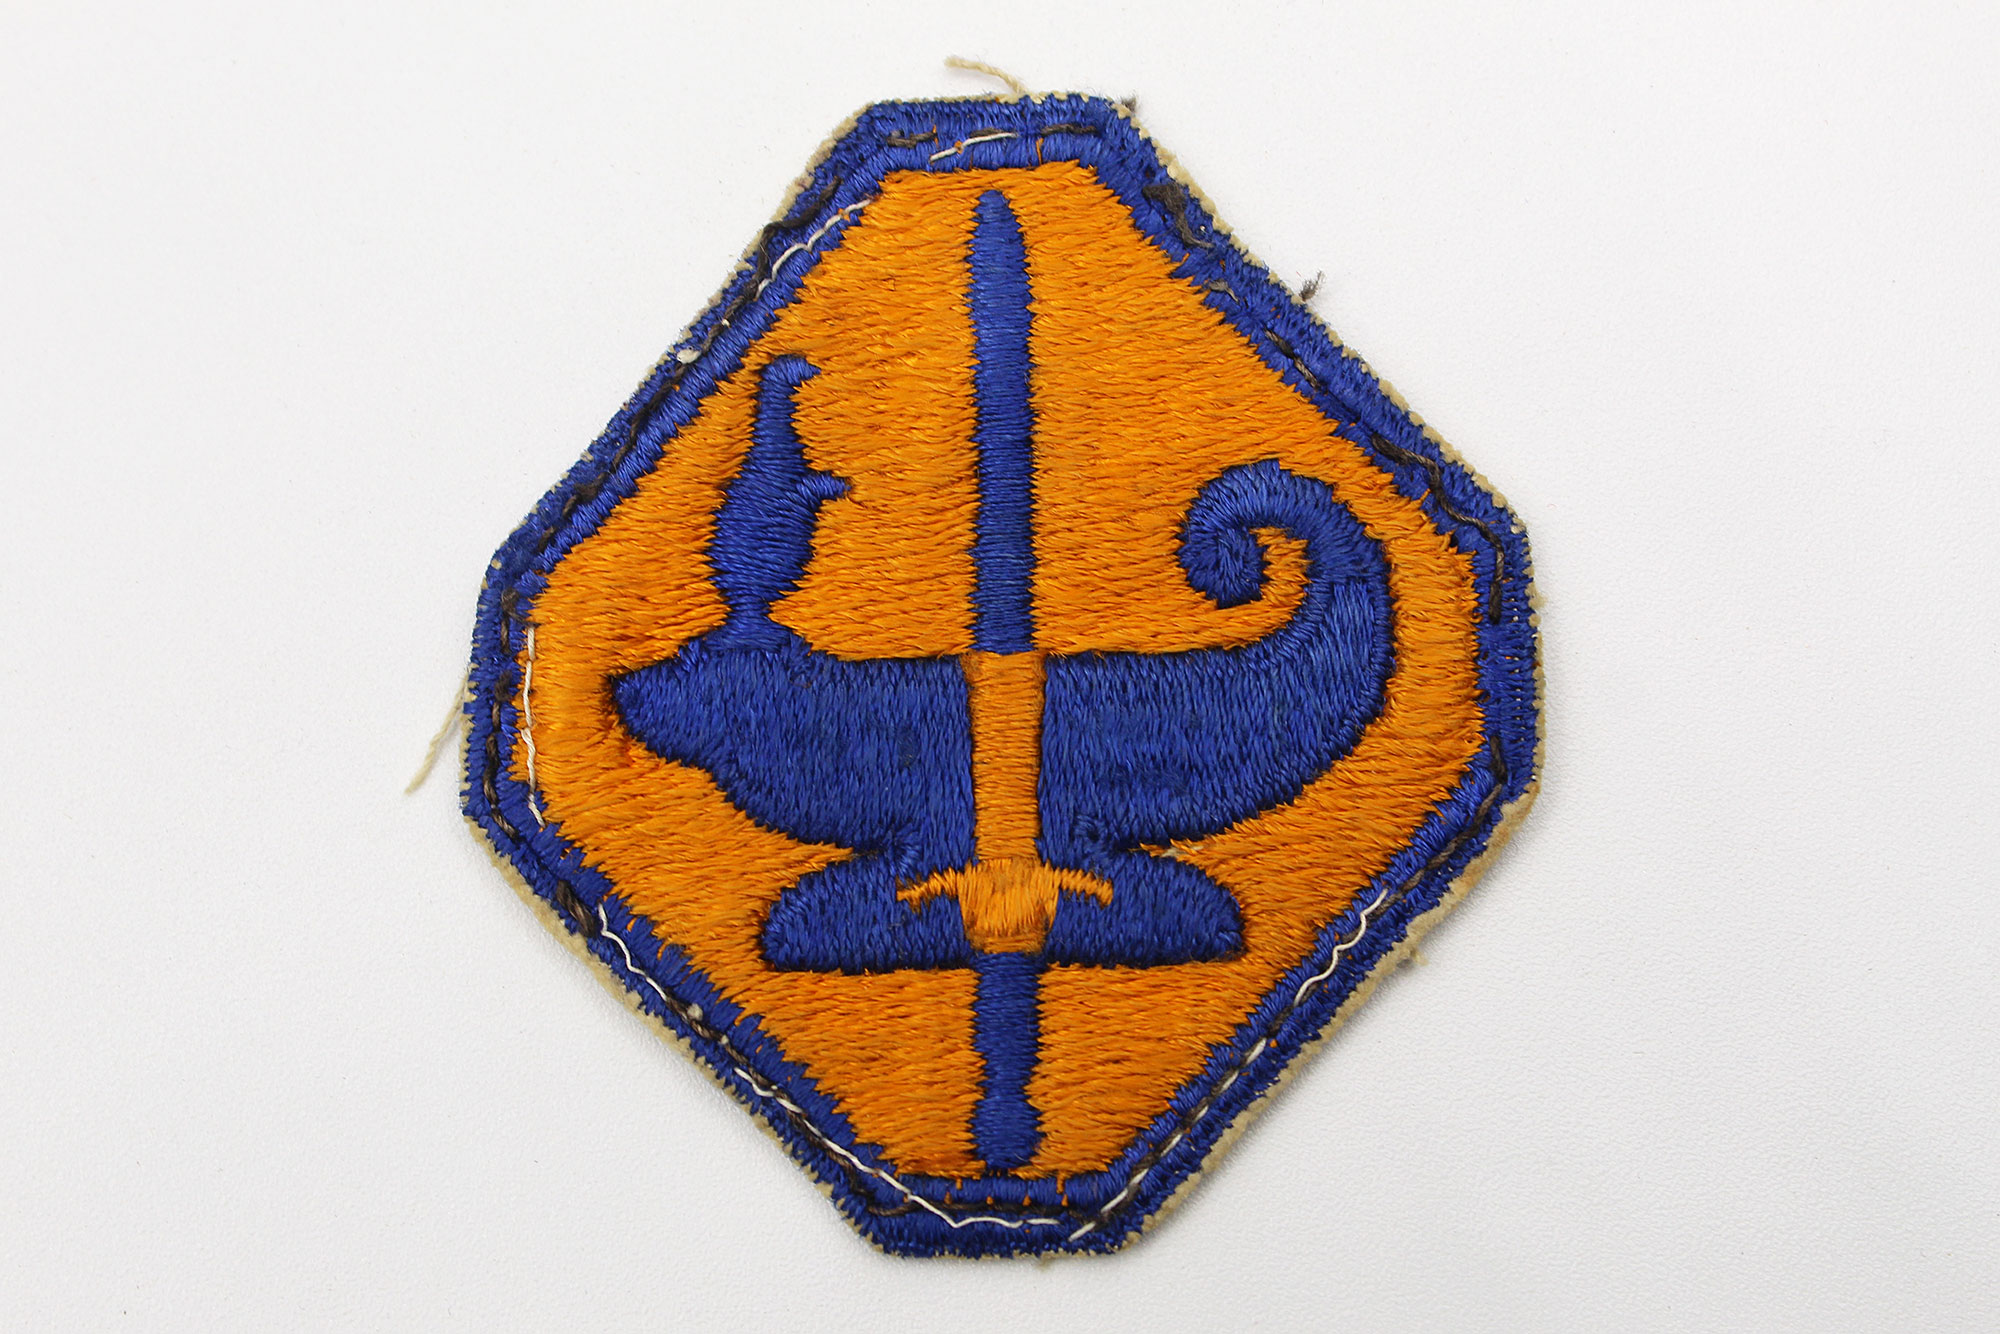 US Army Special Training Patch - WW2 . USP1117 - Time Traveler Militaria